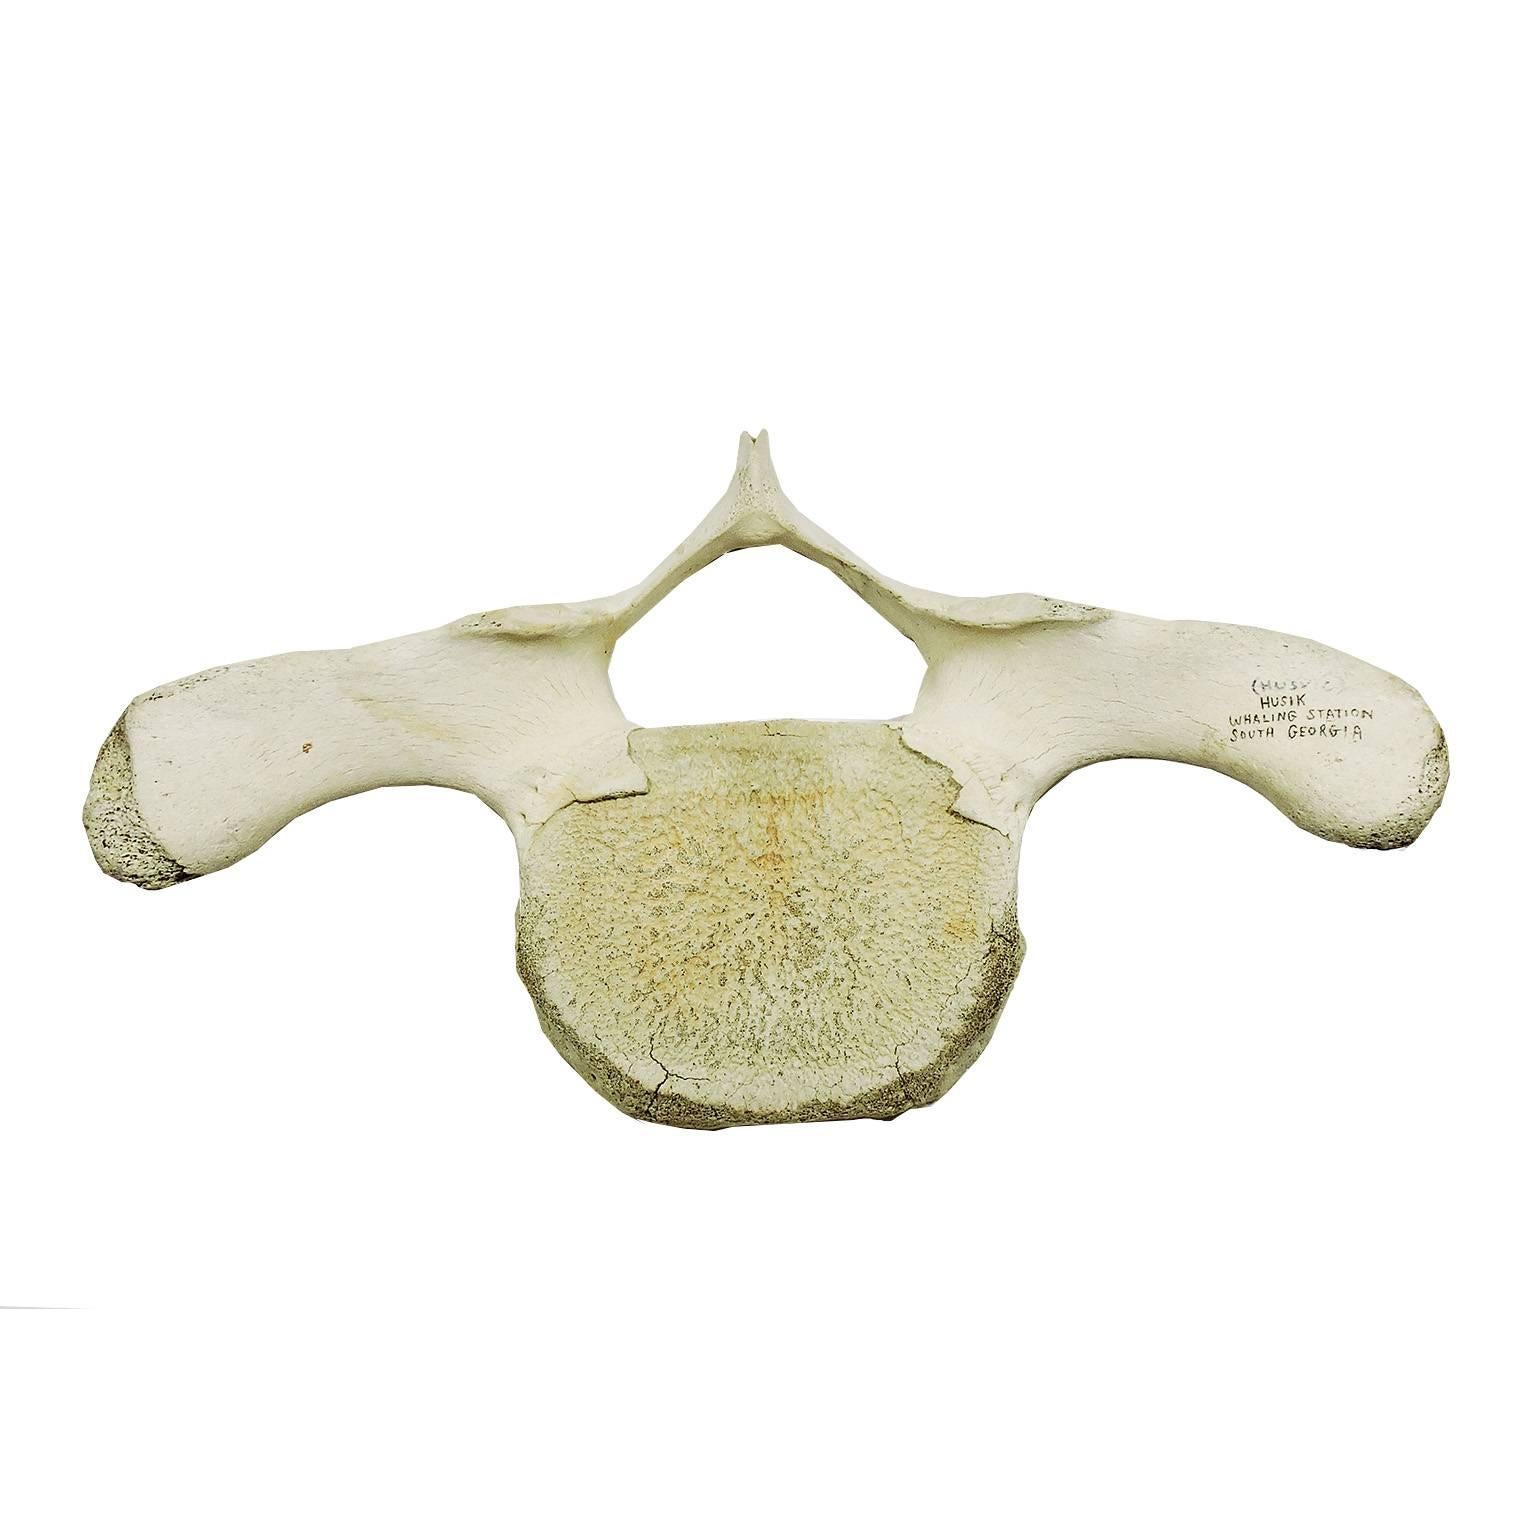 This antique whale vertebrae is signed Husvik Whaling Station, South Georgia
Dimensions: 26 x 17 x 8 inches.

Husvik was a former whaling station on the north central coast of South Georgia Island in the Southern Atlantic Ocean, near Antarctica.